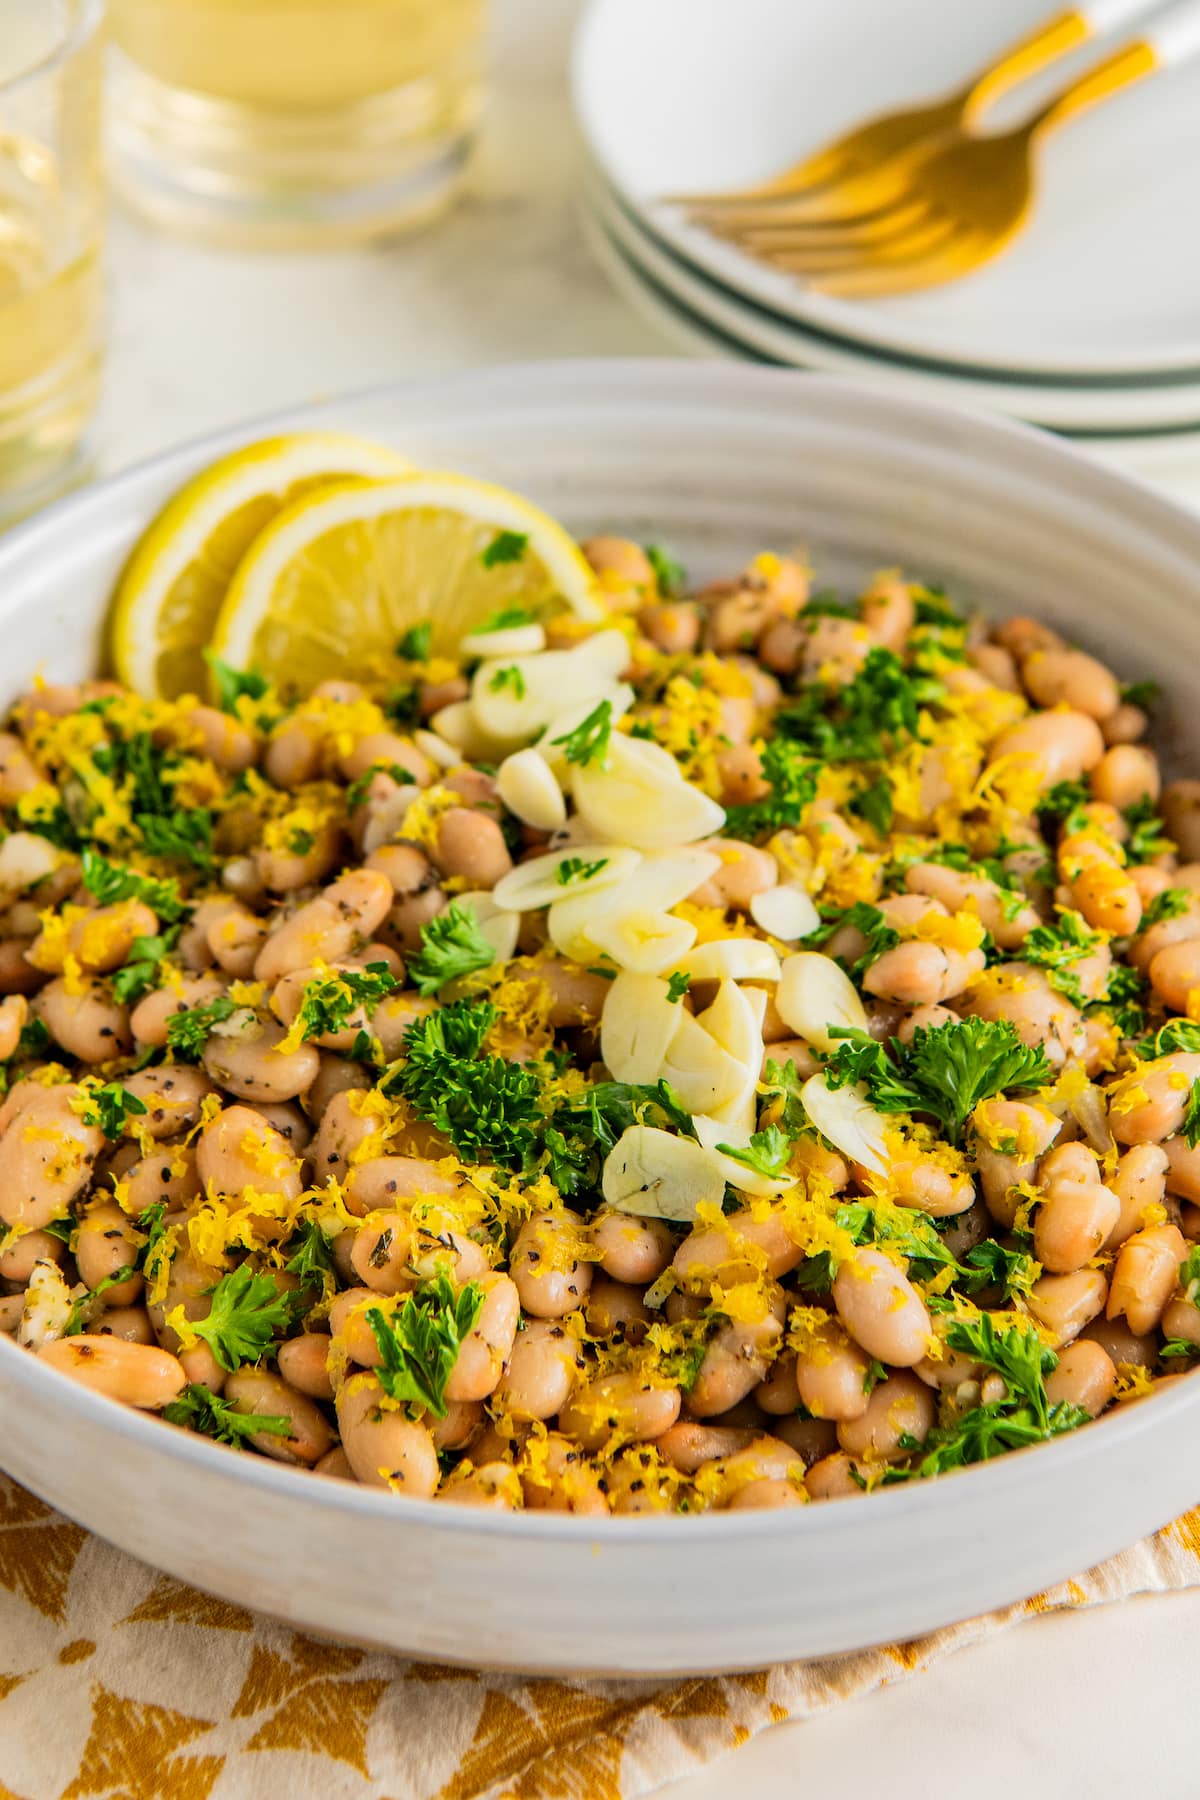 A large white bowl full of easy white bean salad garnished with sliced garlic, lemon zest and freshly minced curly parsley.